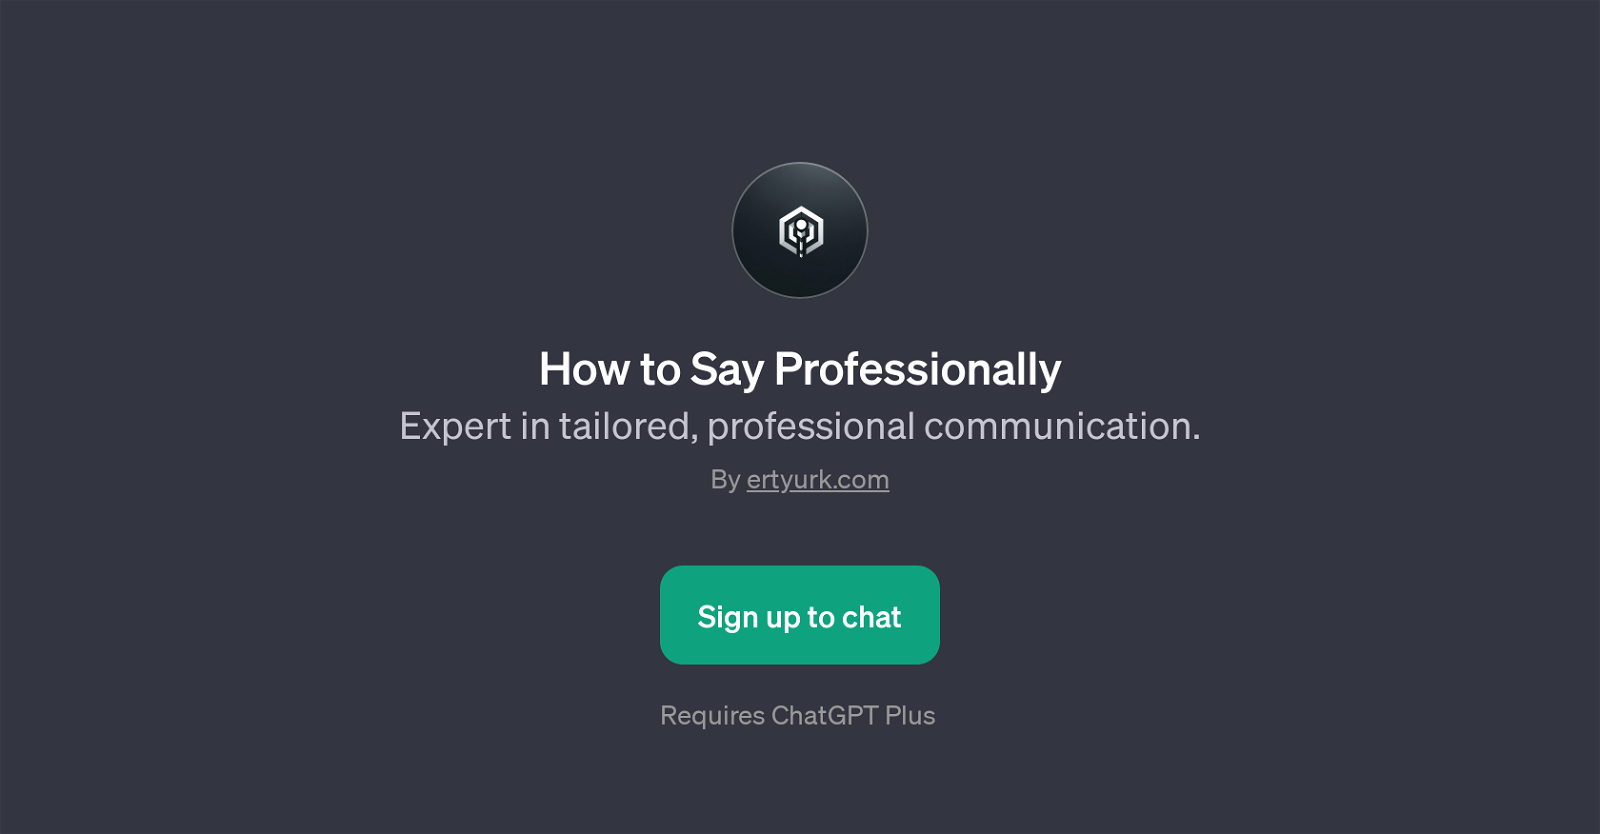 How to Say Professionally website